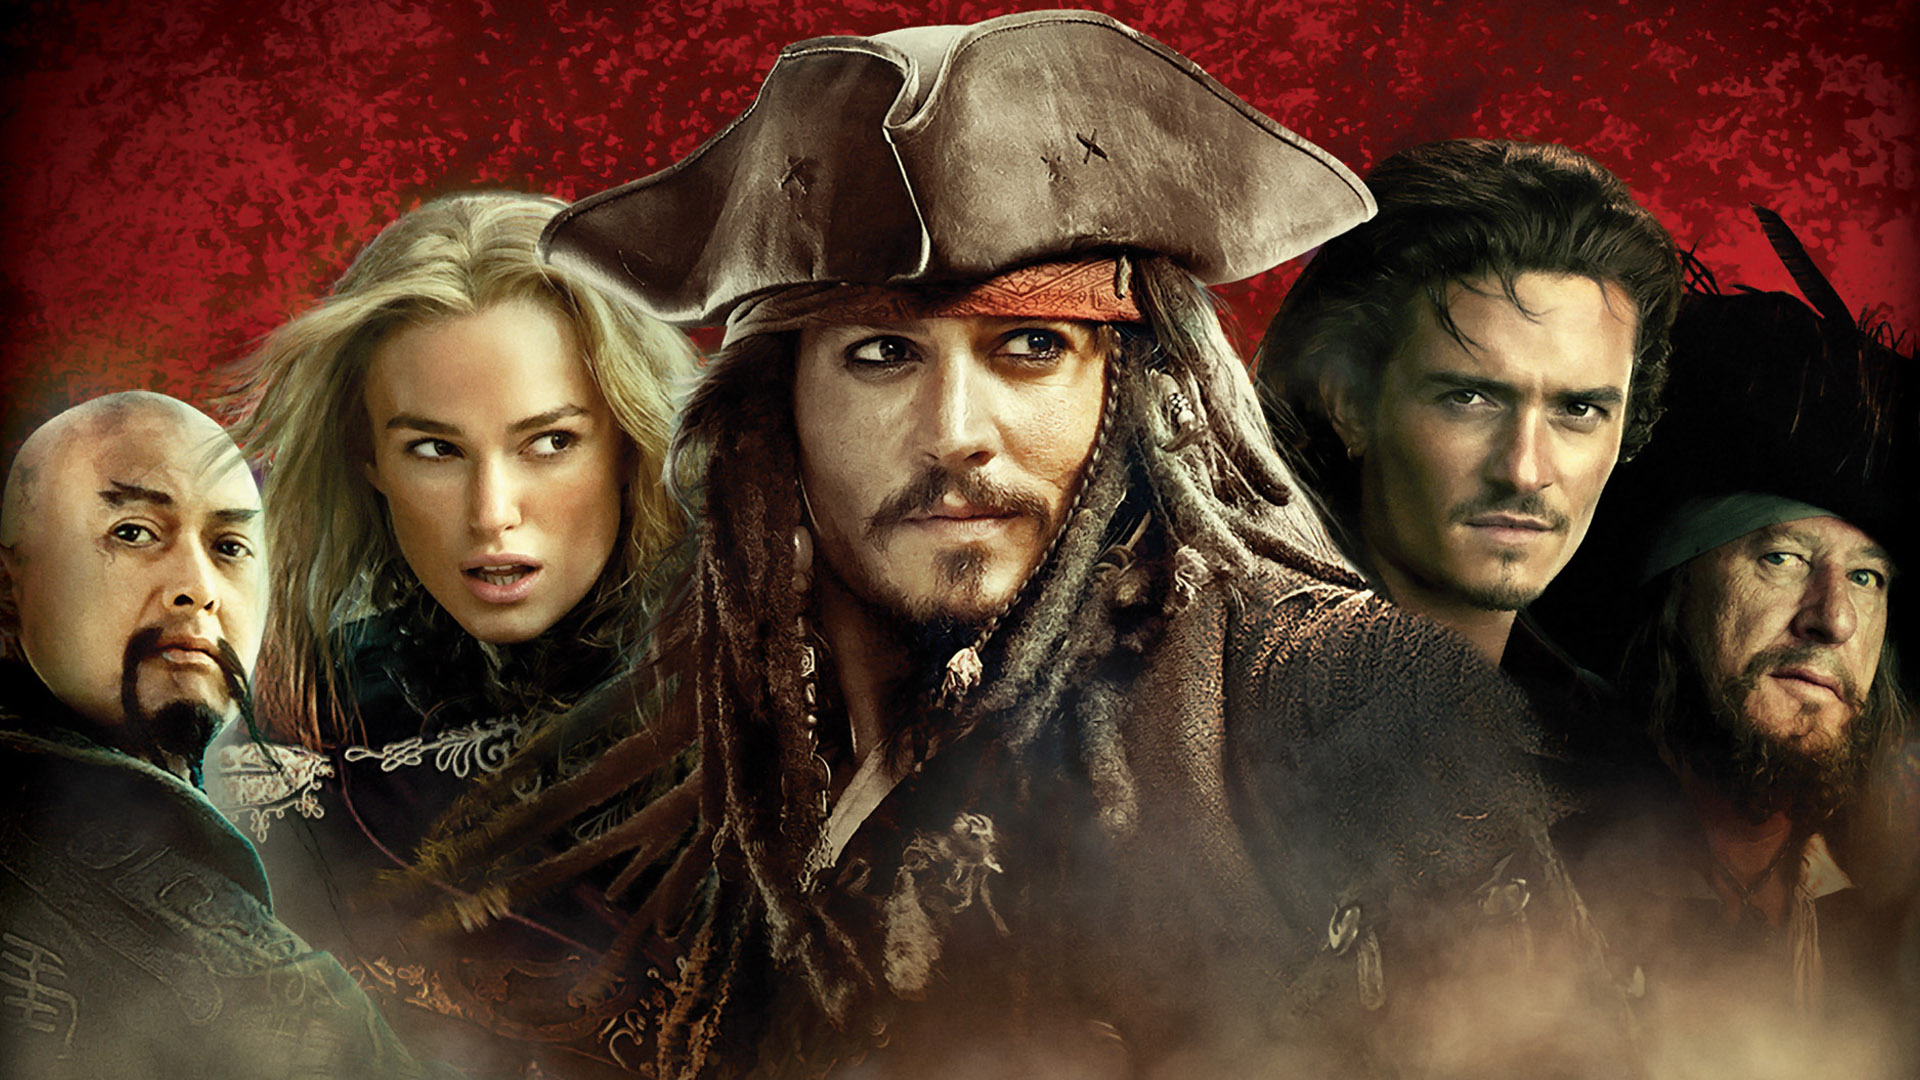 Free HD jack sparrow, geoffrey rush, movie, pirates of the caribbean: at world's end, captain sao feng, chow yun fat, elizabeth swann, hector barbossa, johnny depp, keira knightley, orlando bloom, will turner, pirates of the caribbean